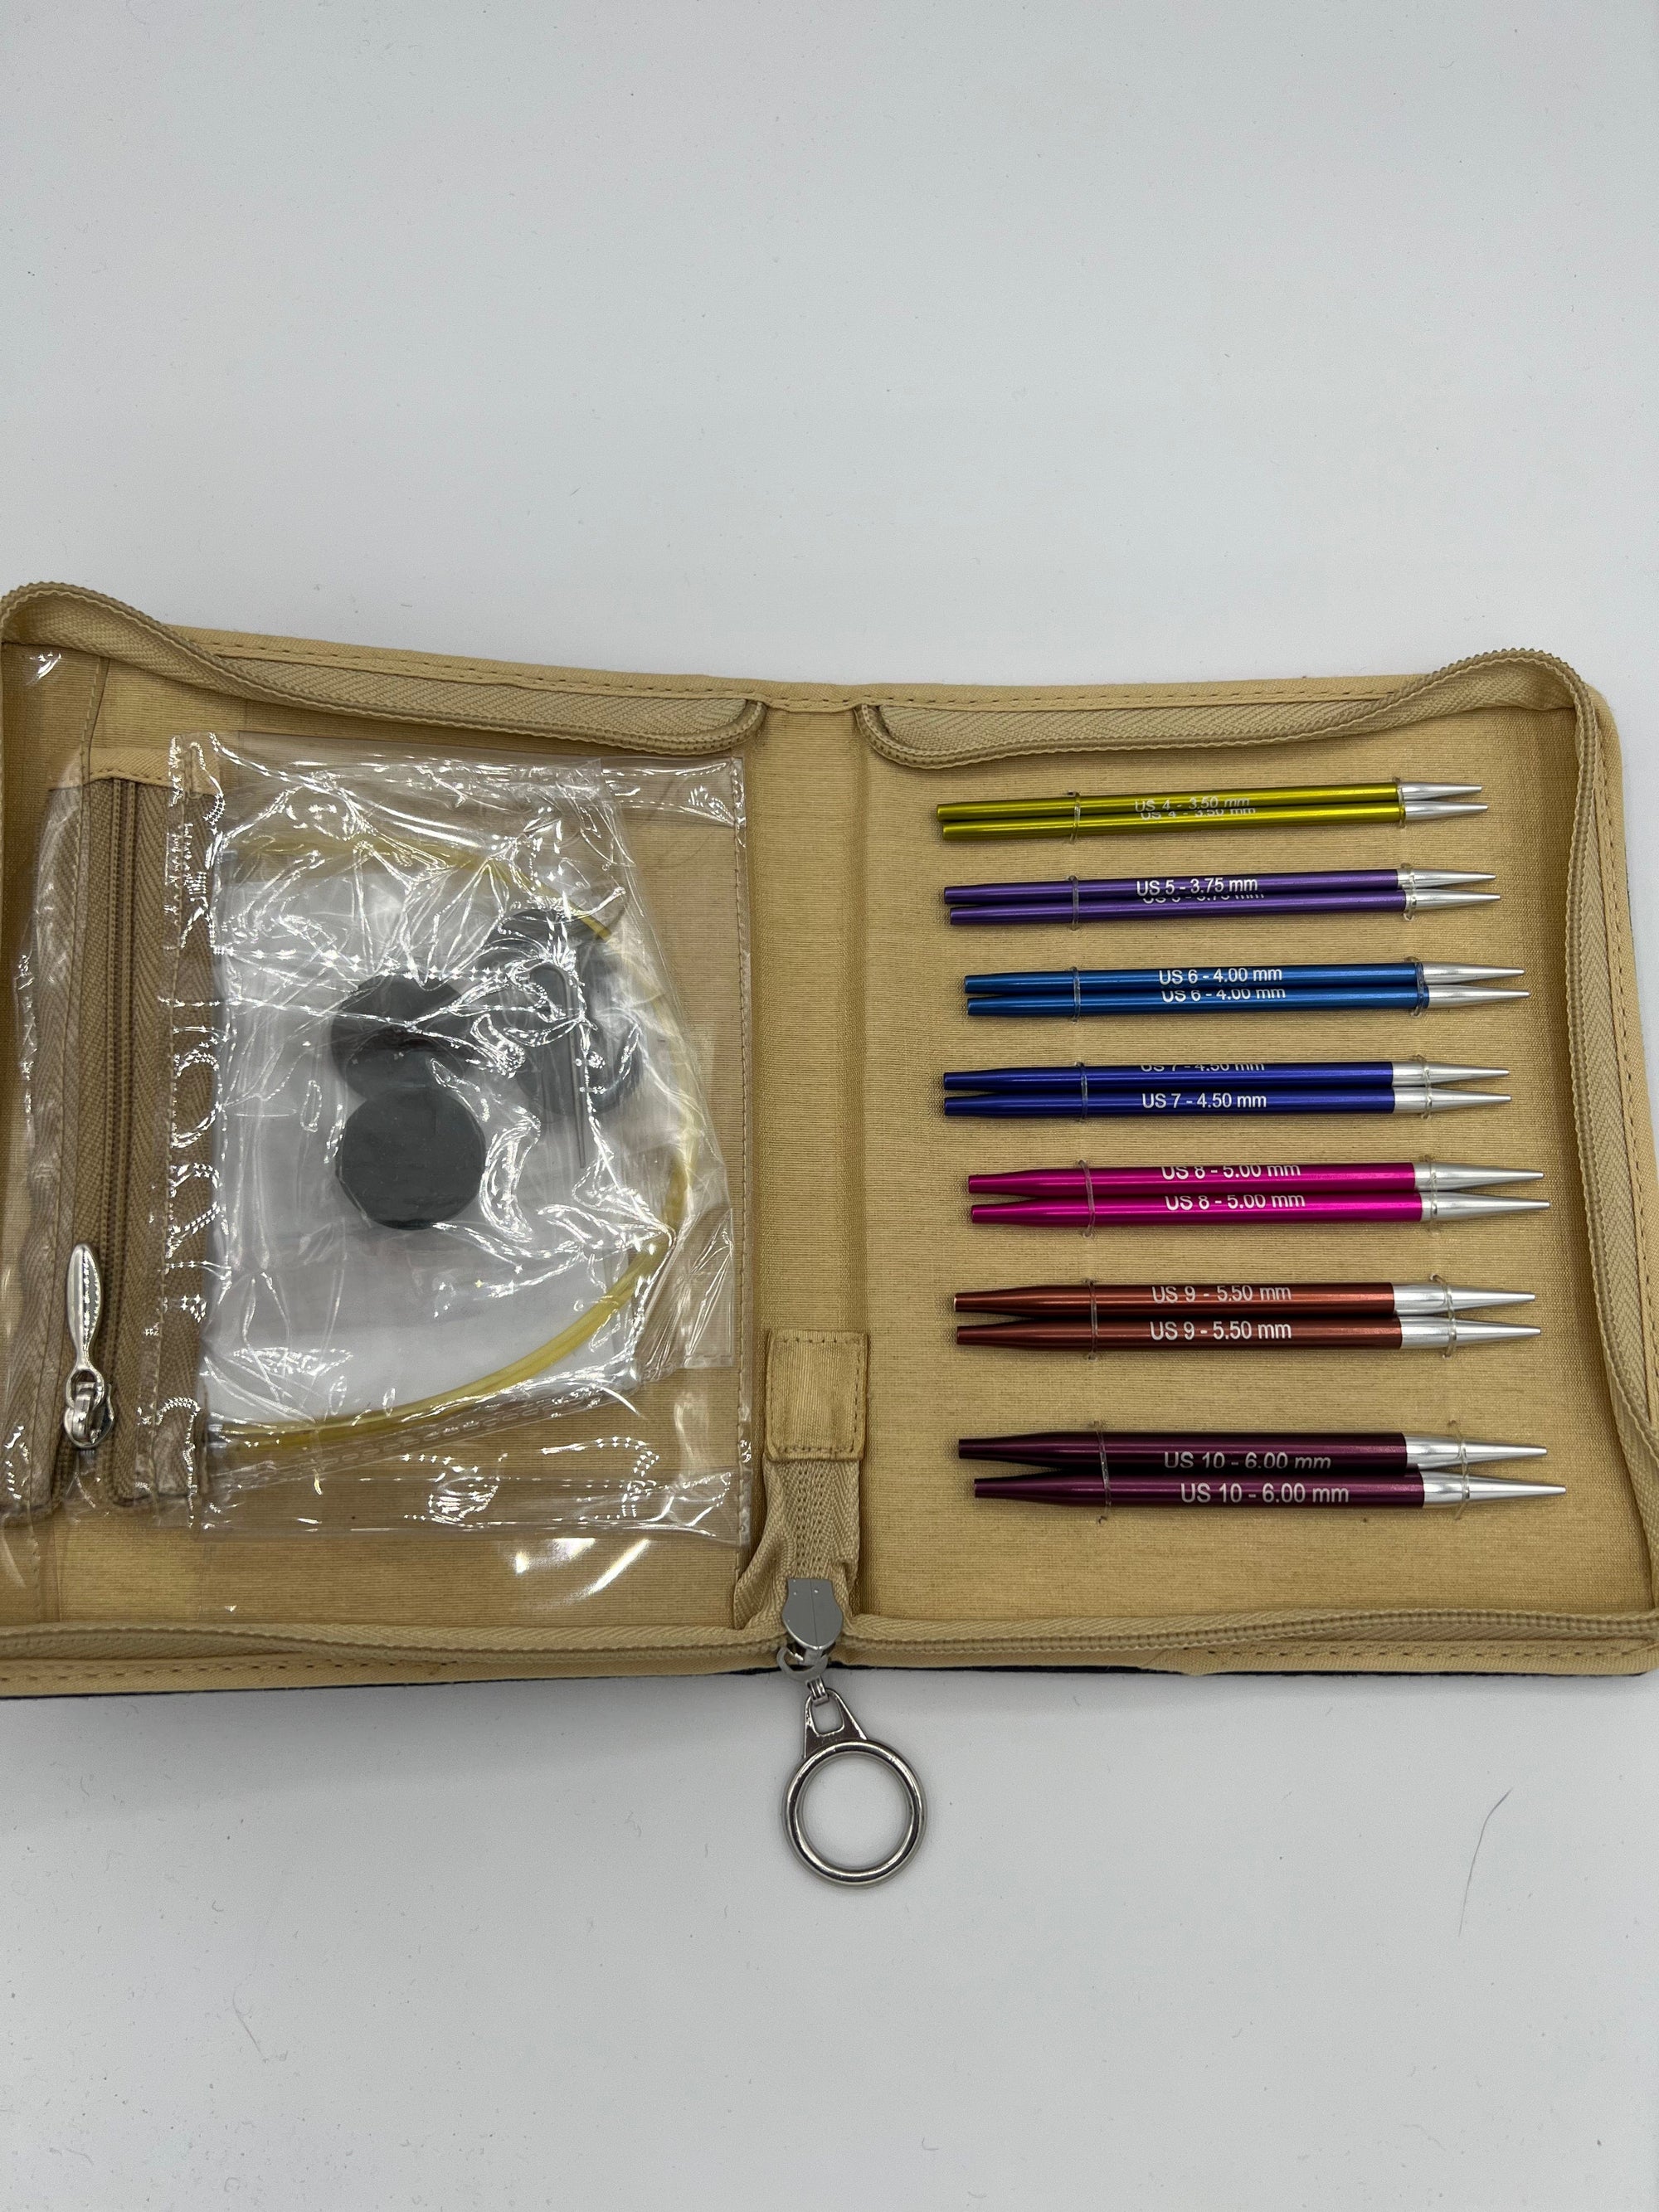 Knitter's Pride Knitting Needles Zing Special Interchangeable Set